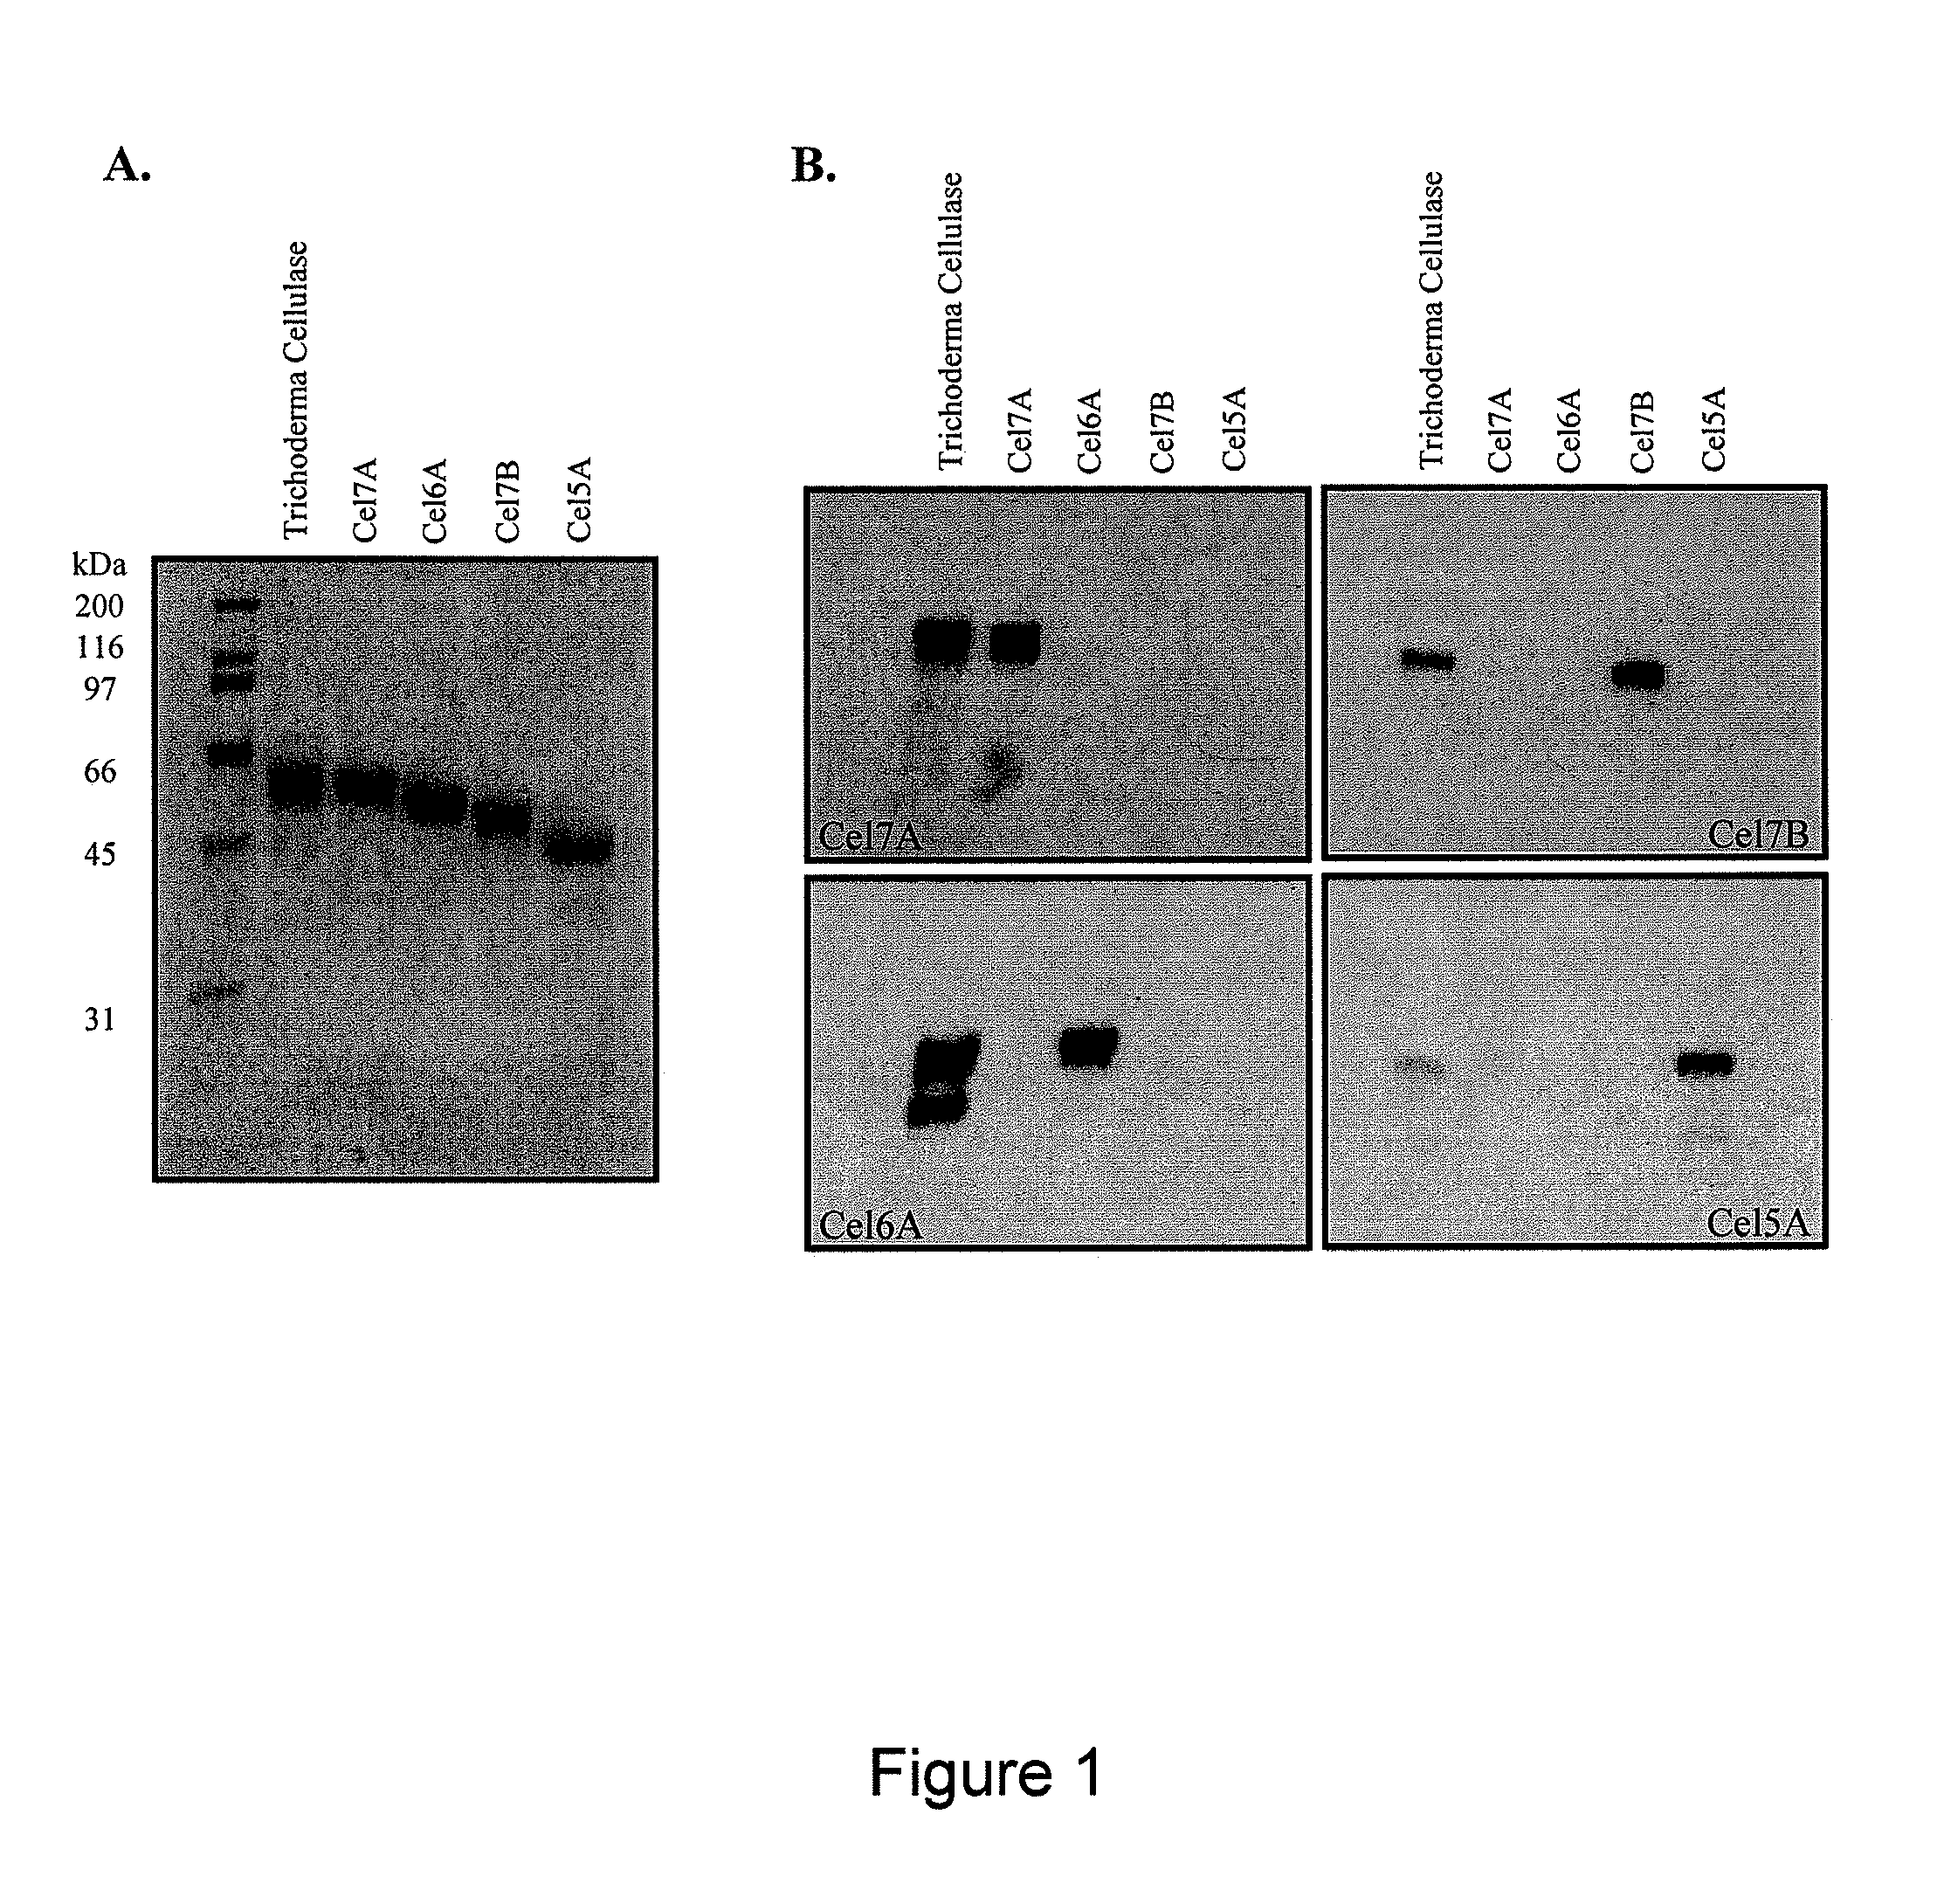 Carbohydate binding modules with reduced binding to lignin